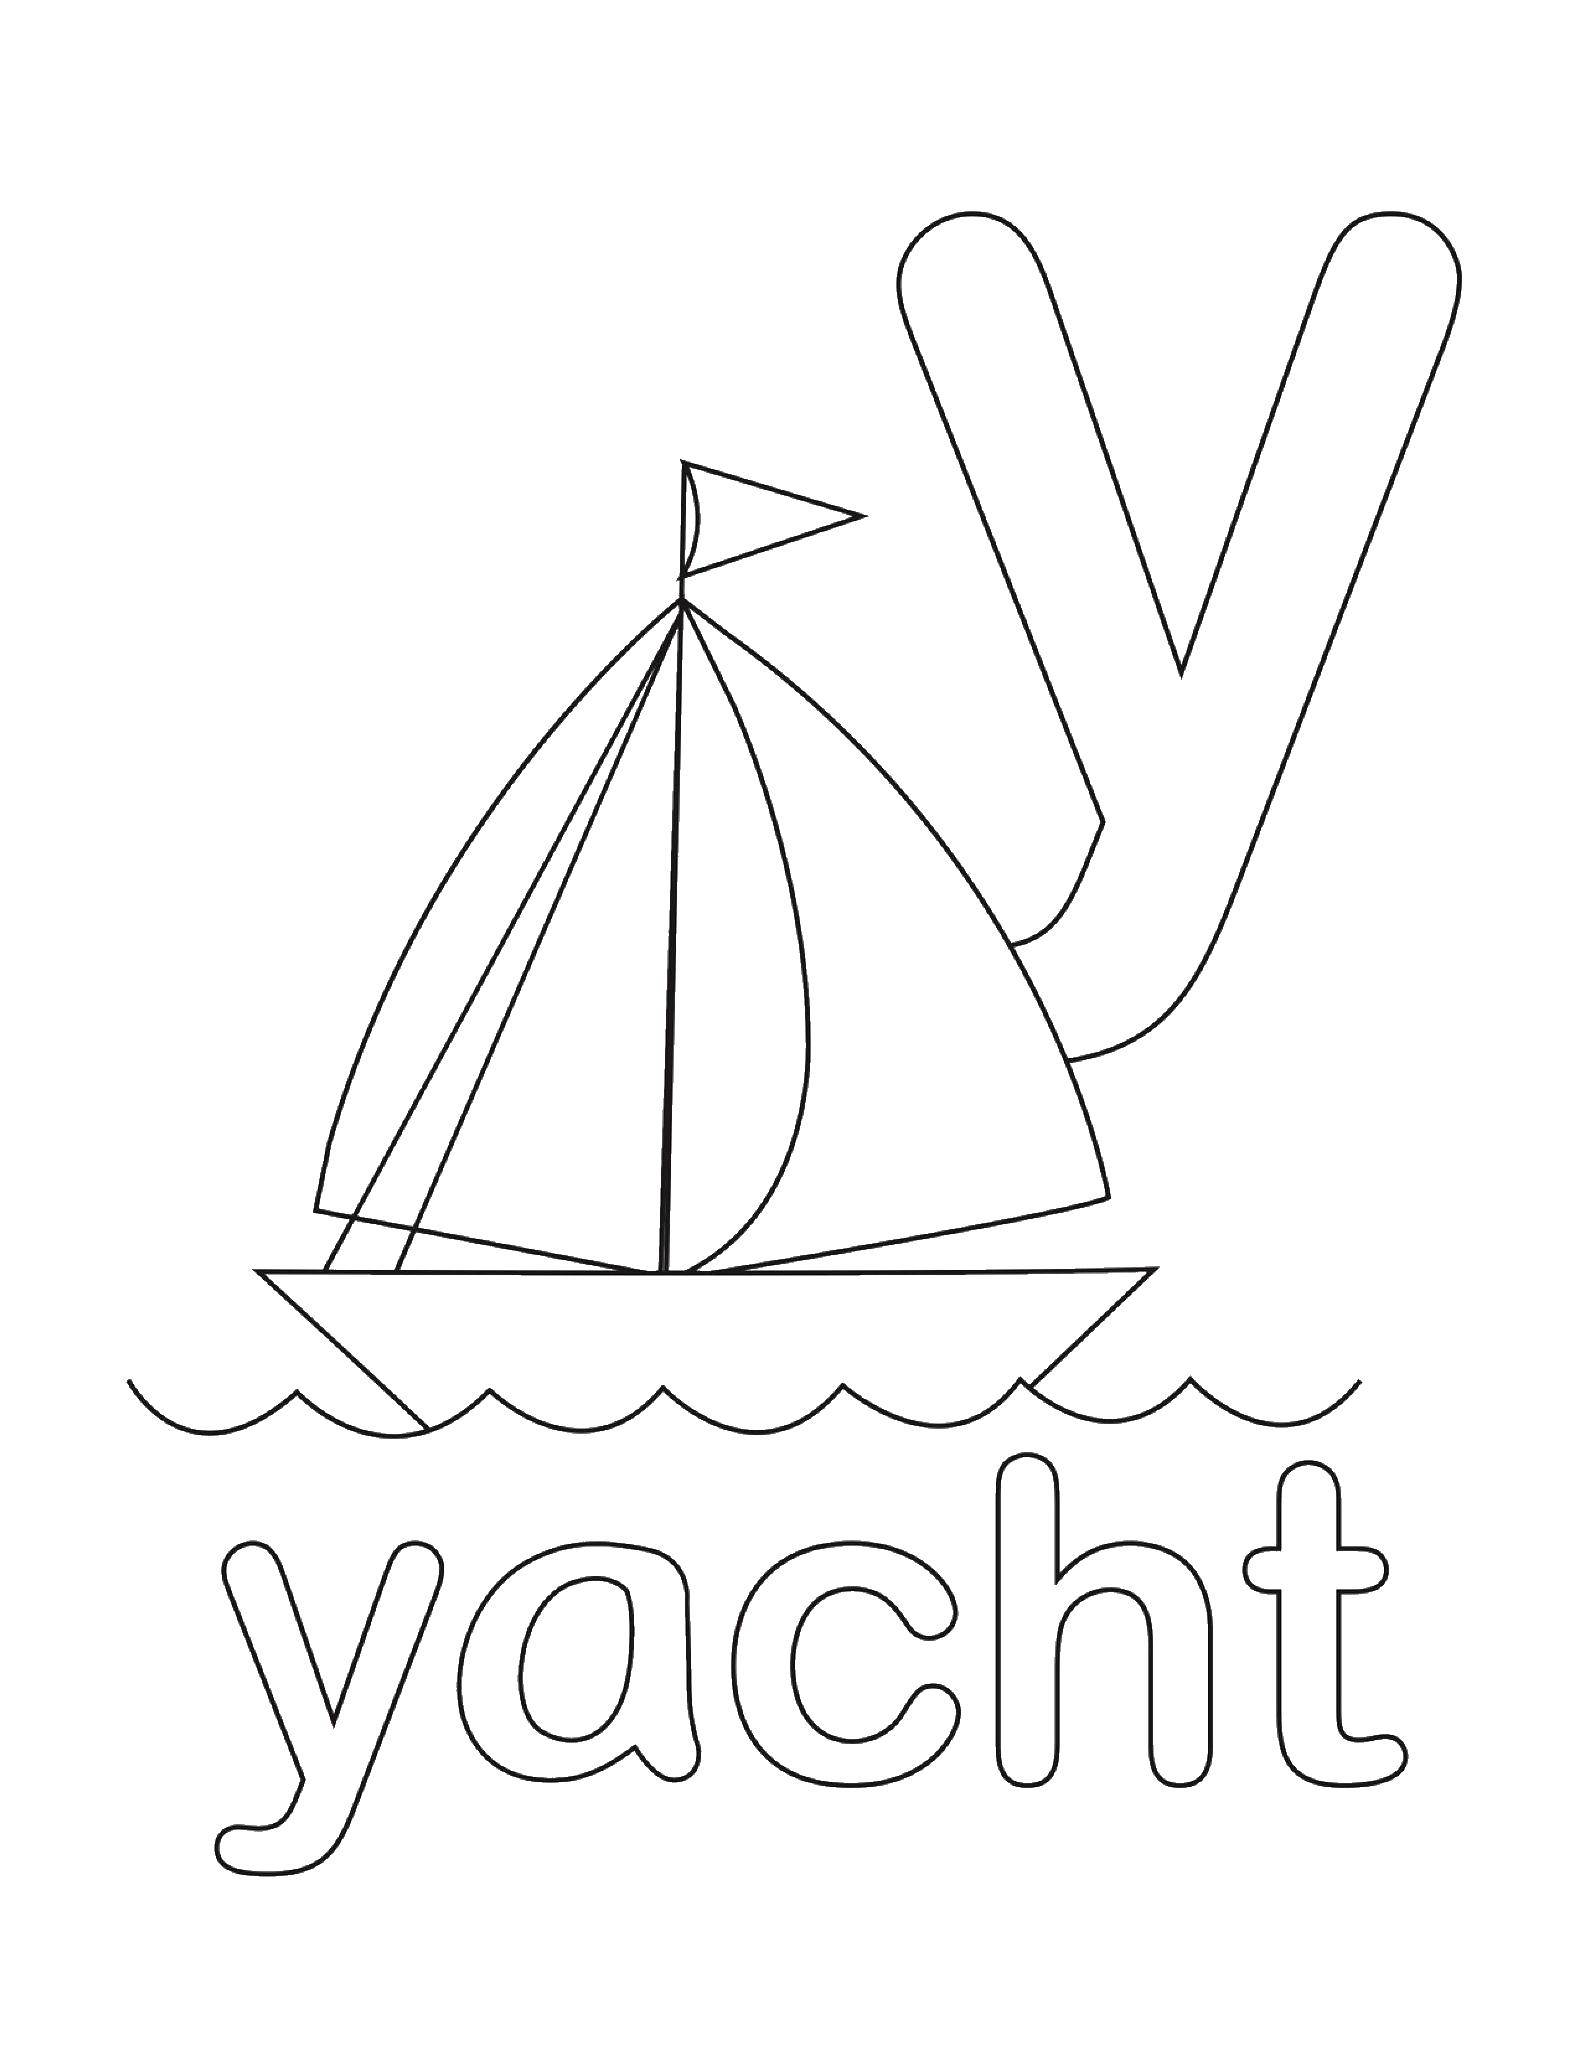 Coloring I yacht. Category English words. Tags:  English.